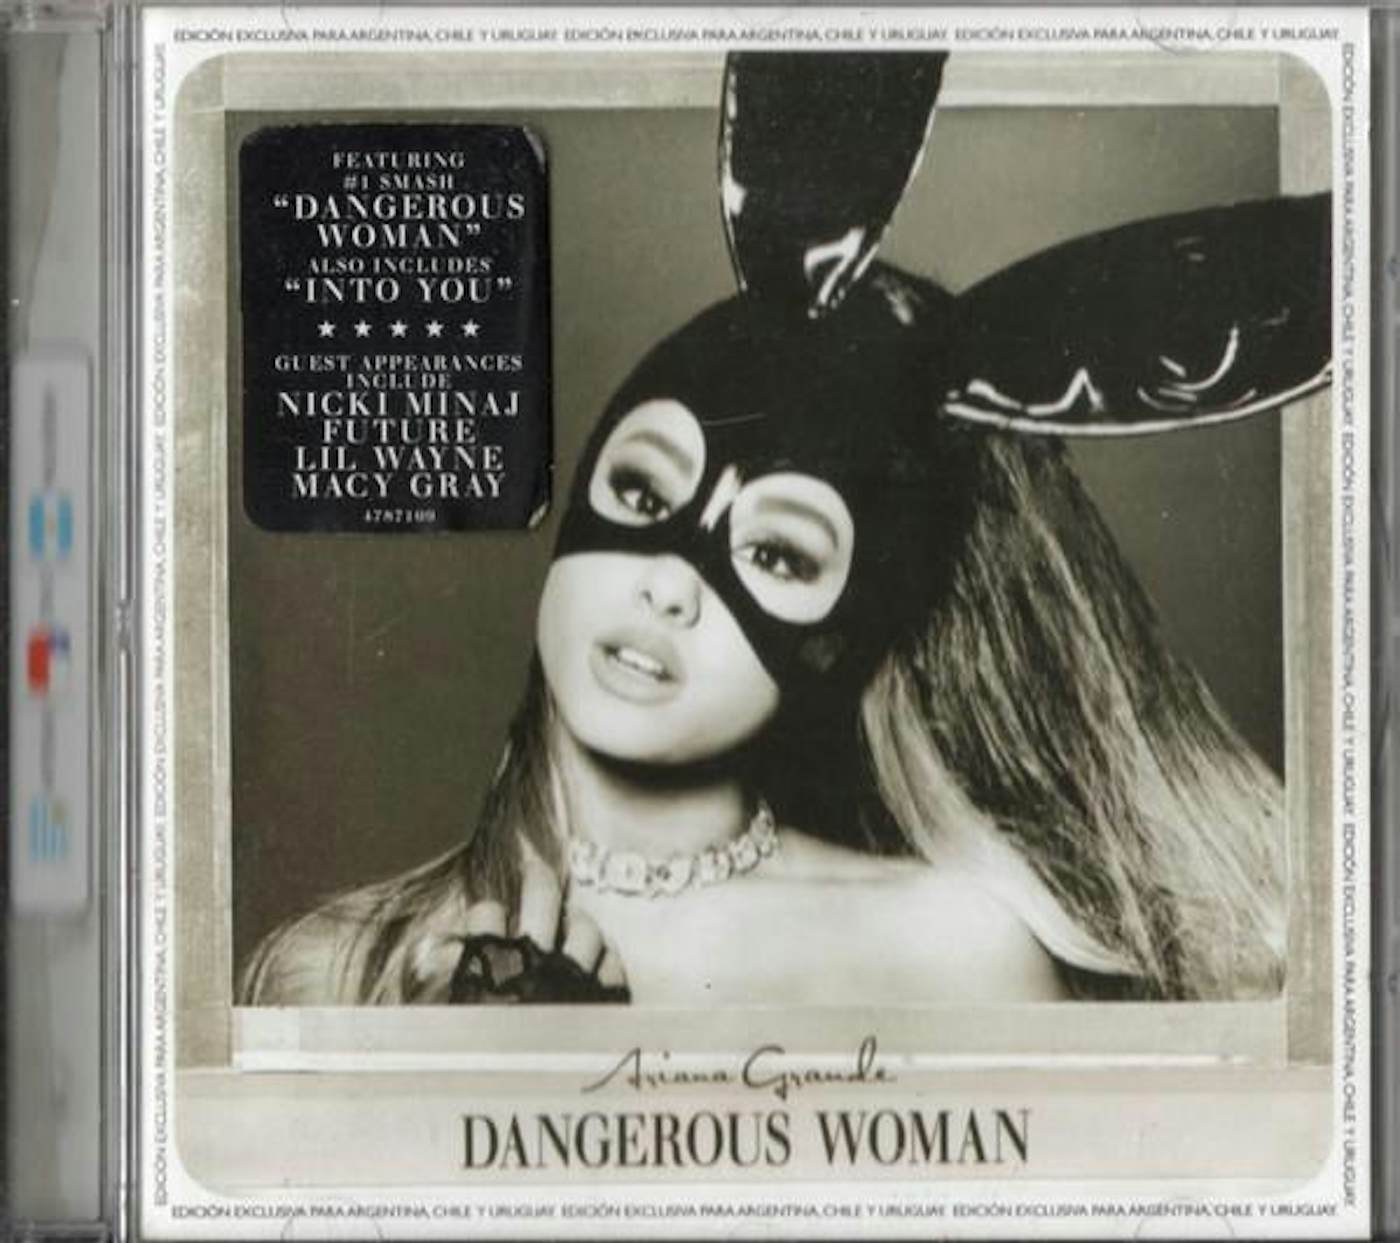 Ariana Grande Positions Signed CD UNOPENED 